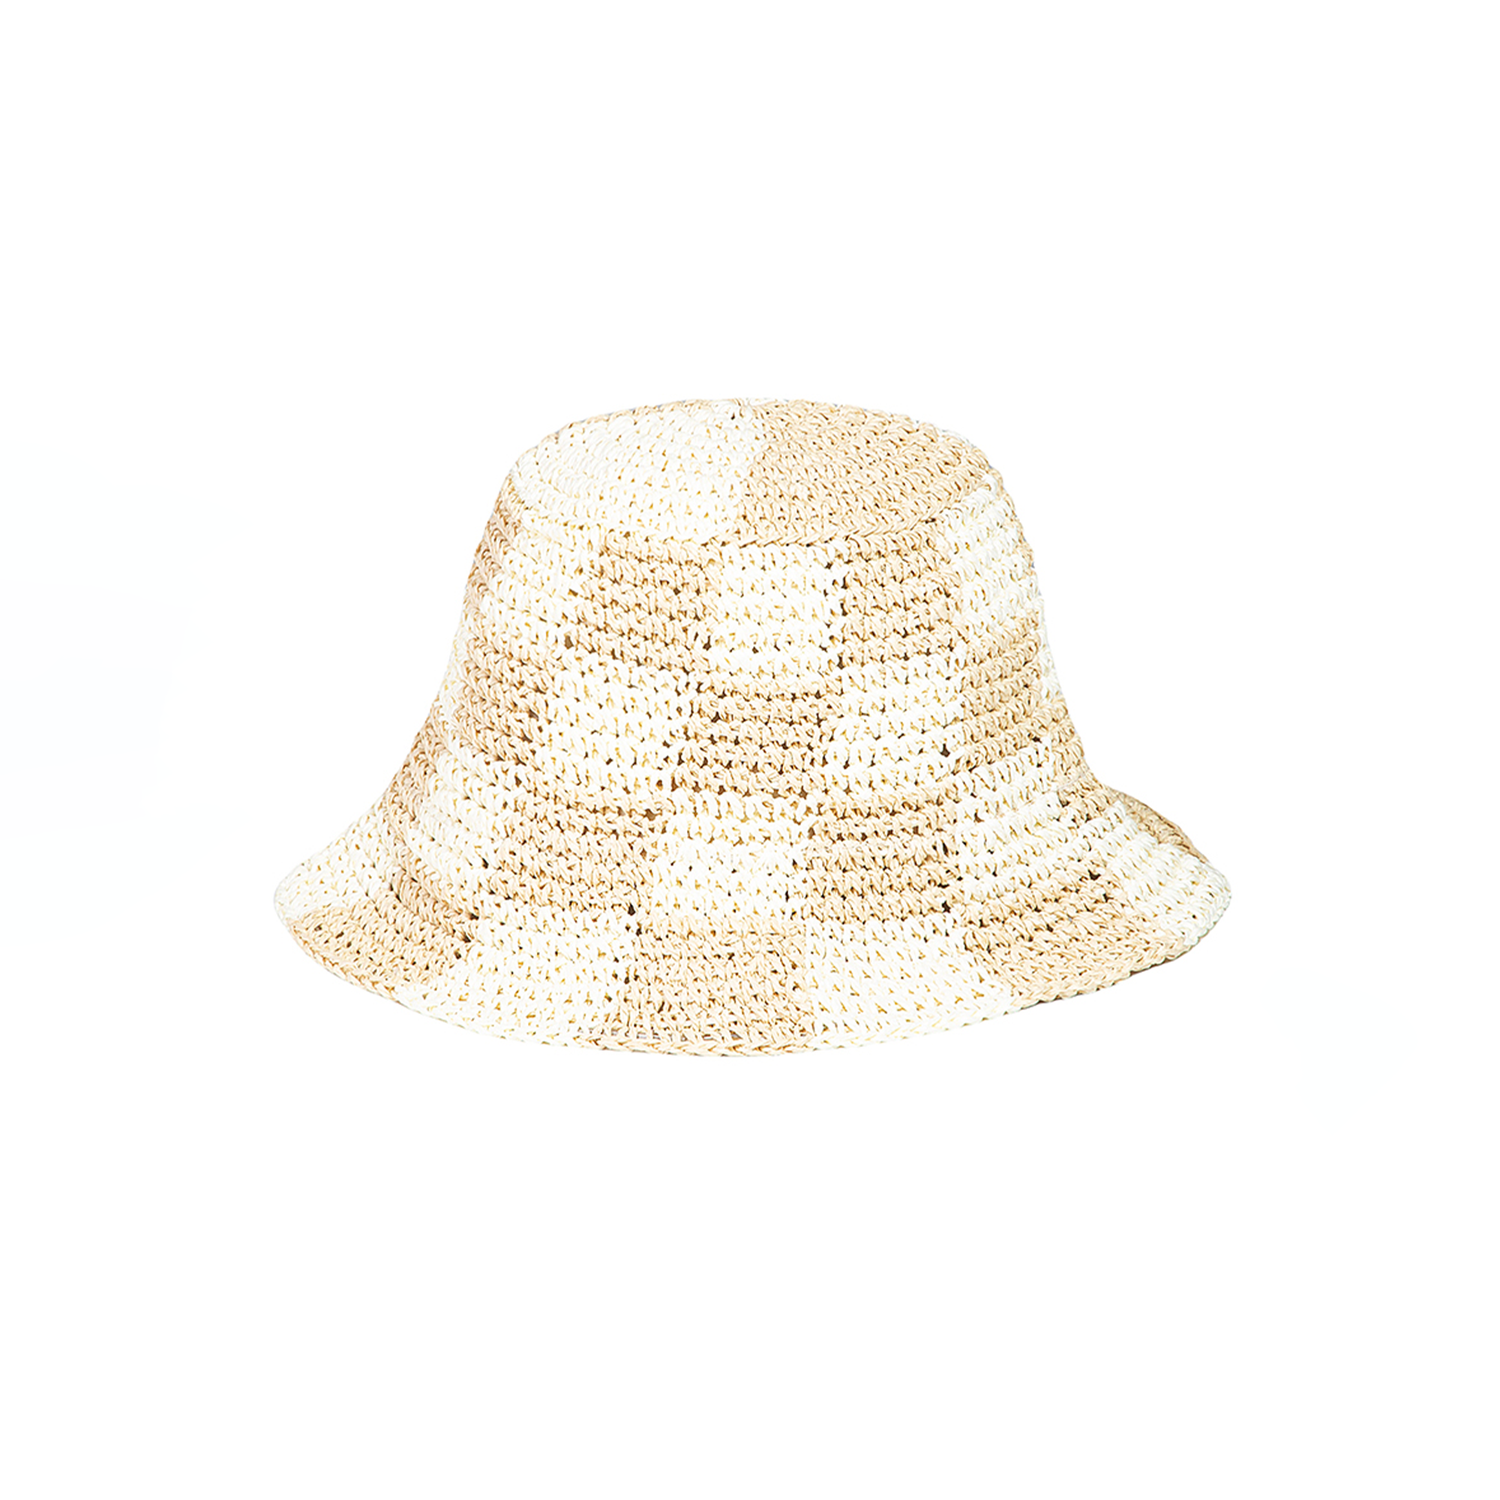 Checkered Bucket Hat. This check bucket hat is the perfect vacay ready piece! We love its beachy vibes